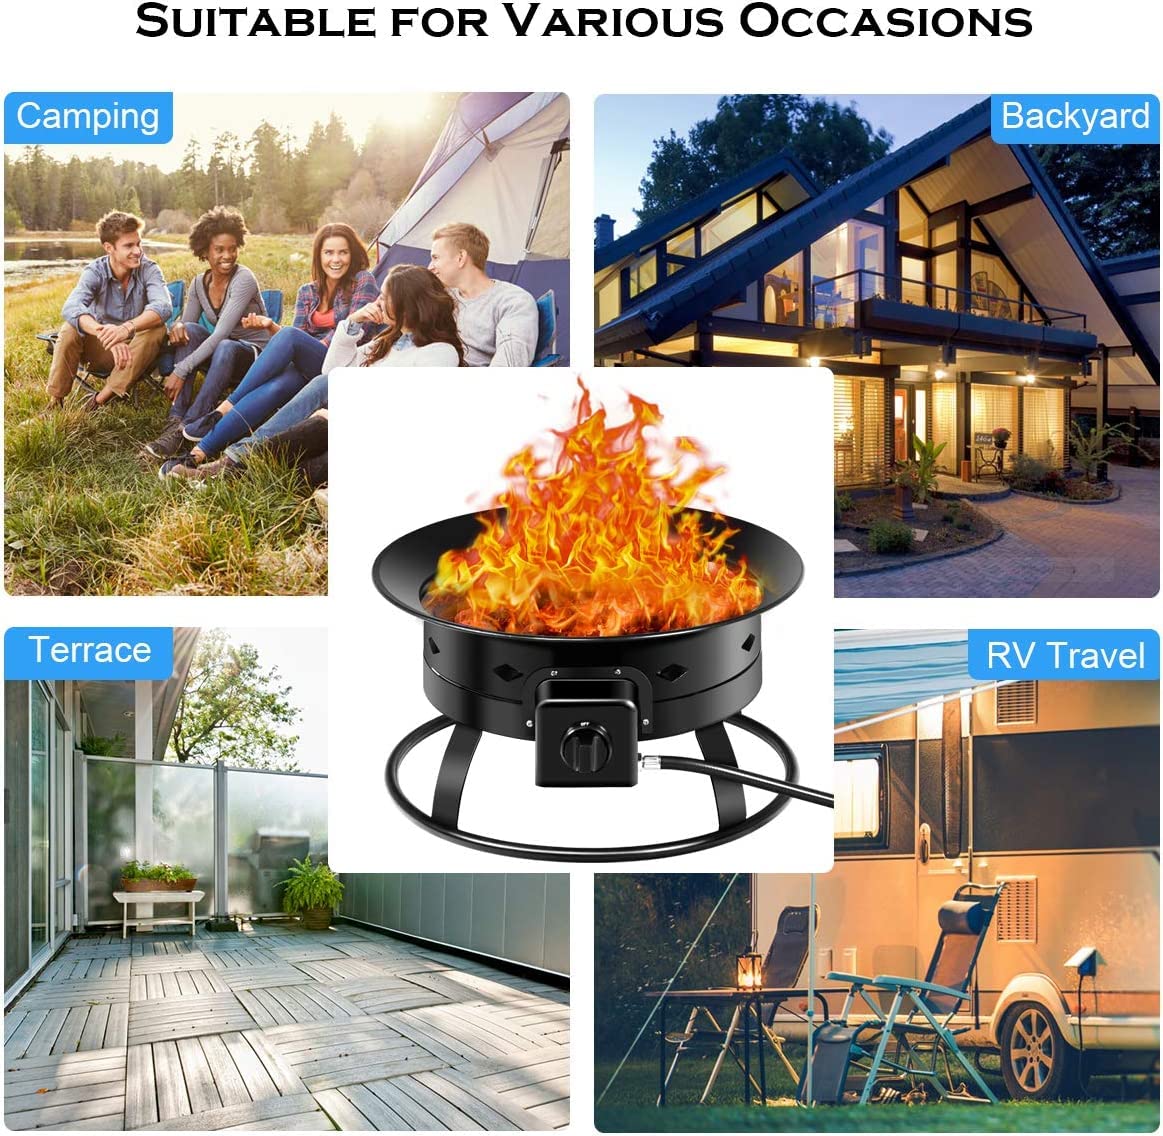 Renatone 58,000 BTU Propane Fire Bowl, 19 Inch Outdoor Camping Fire Bowl with PVC Cover, Tank Stabilizer Ring, Handles, Smokeless Fire Pit for RV, Camping, Backyard